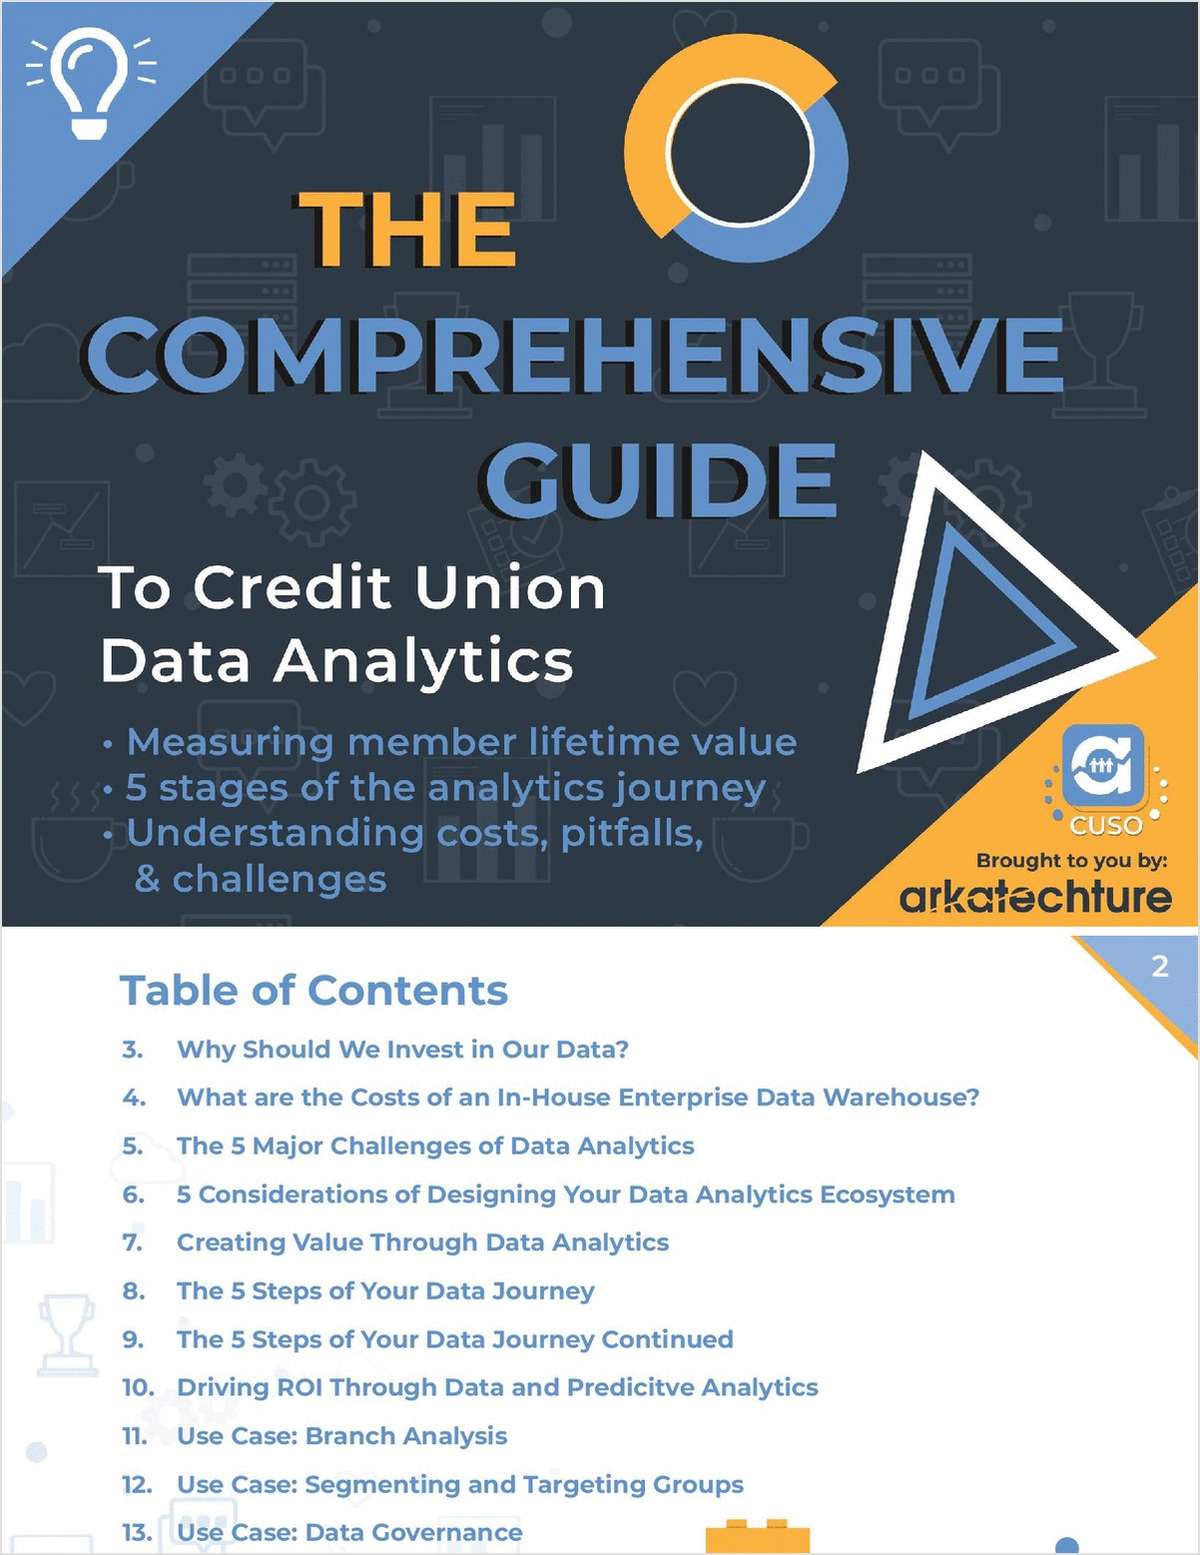 The Comprehensive Guide to Credit Union Data Analytics